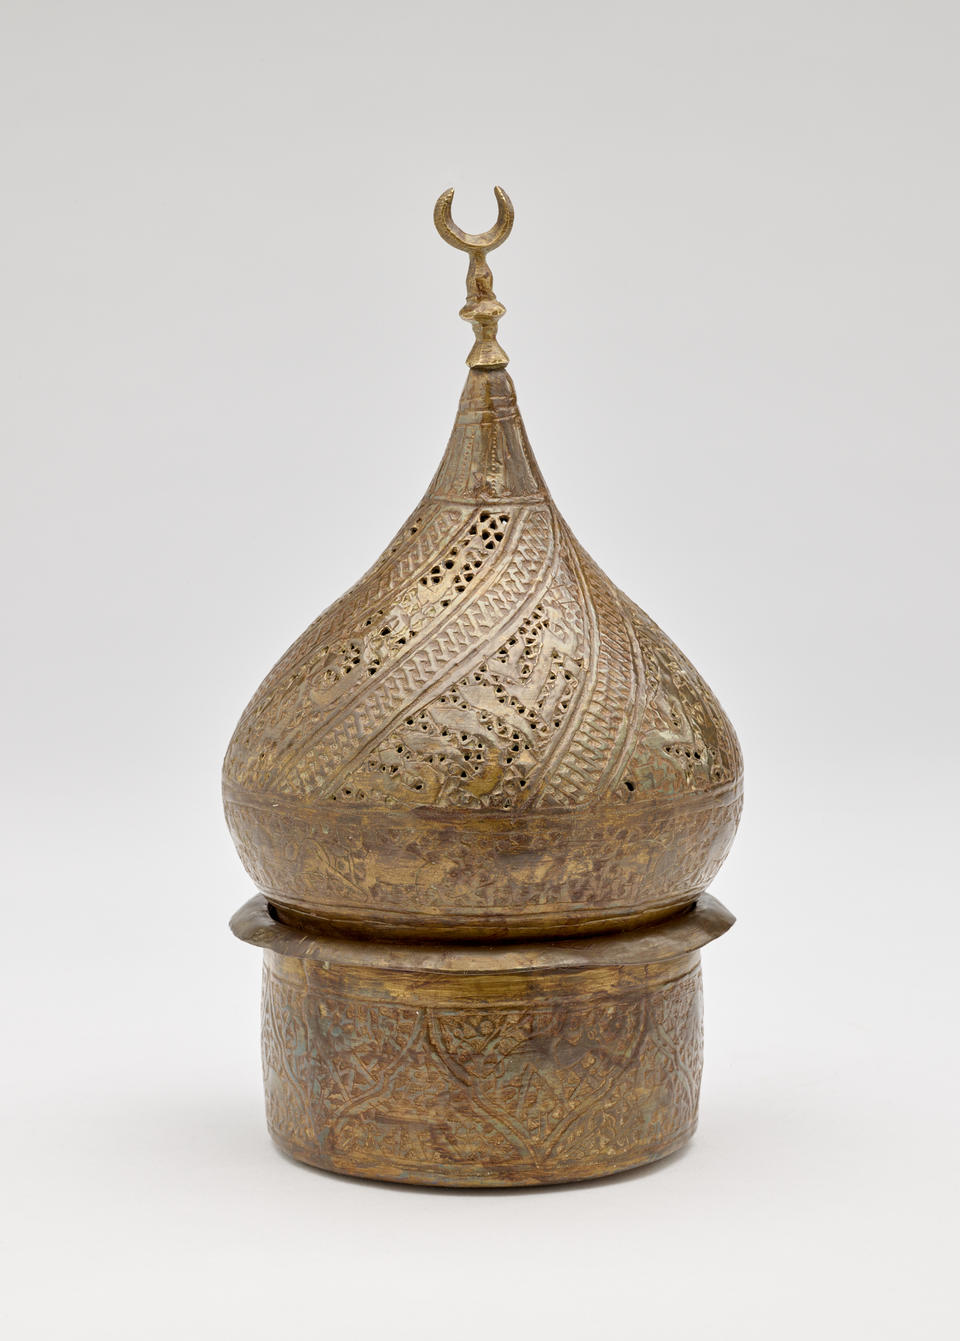 Bronze-colored sculptural object with incised design. Top half is teardrop shaped with a crescent moon shape on top. Cylindrical vessel on bottom. 